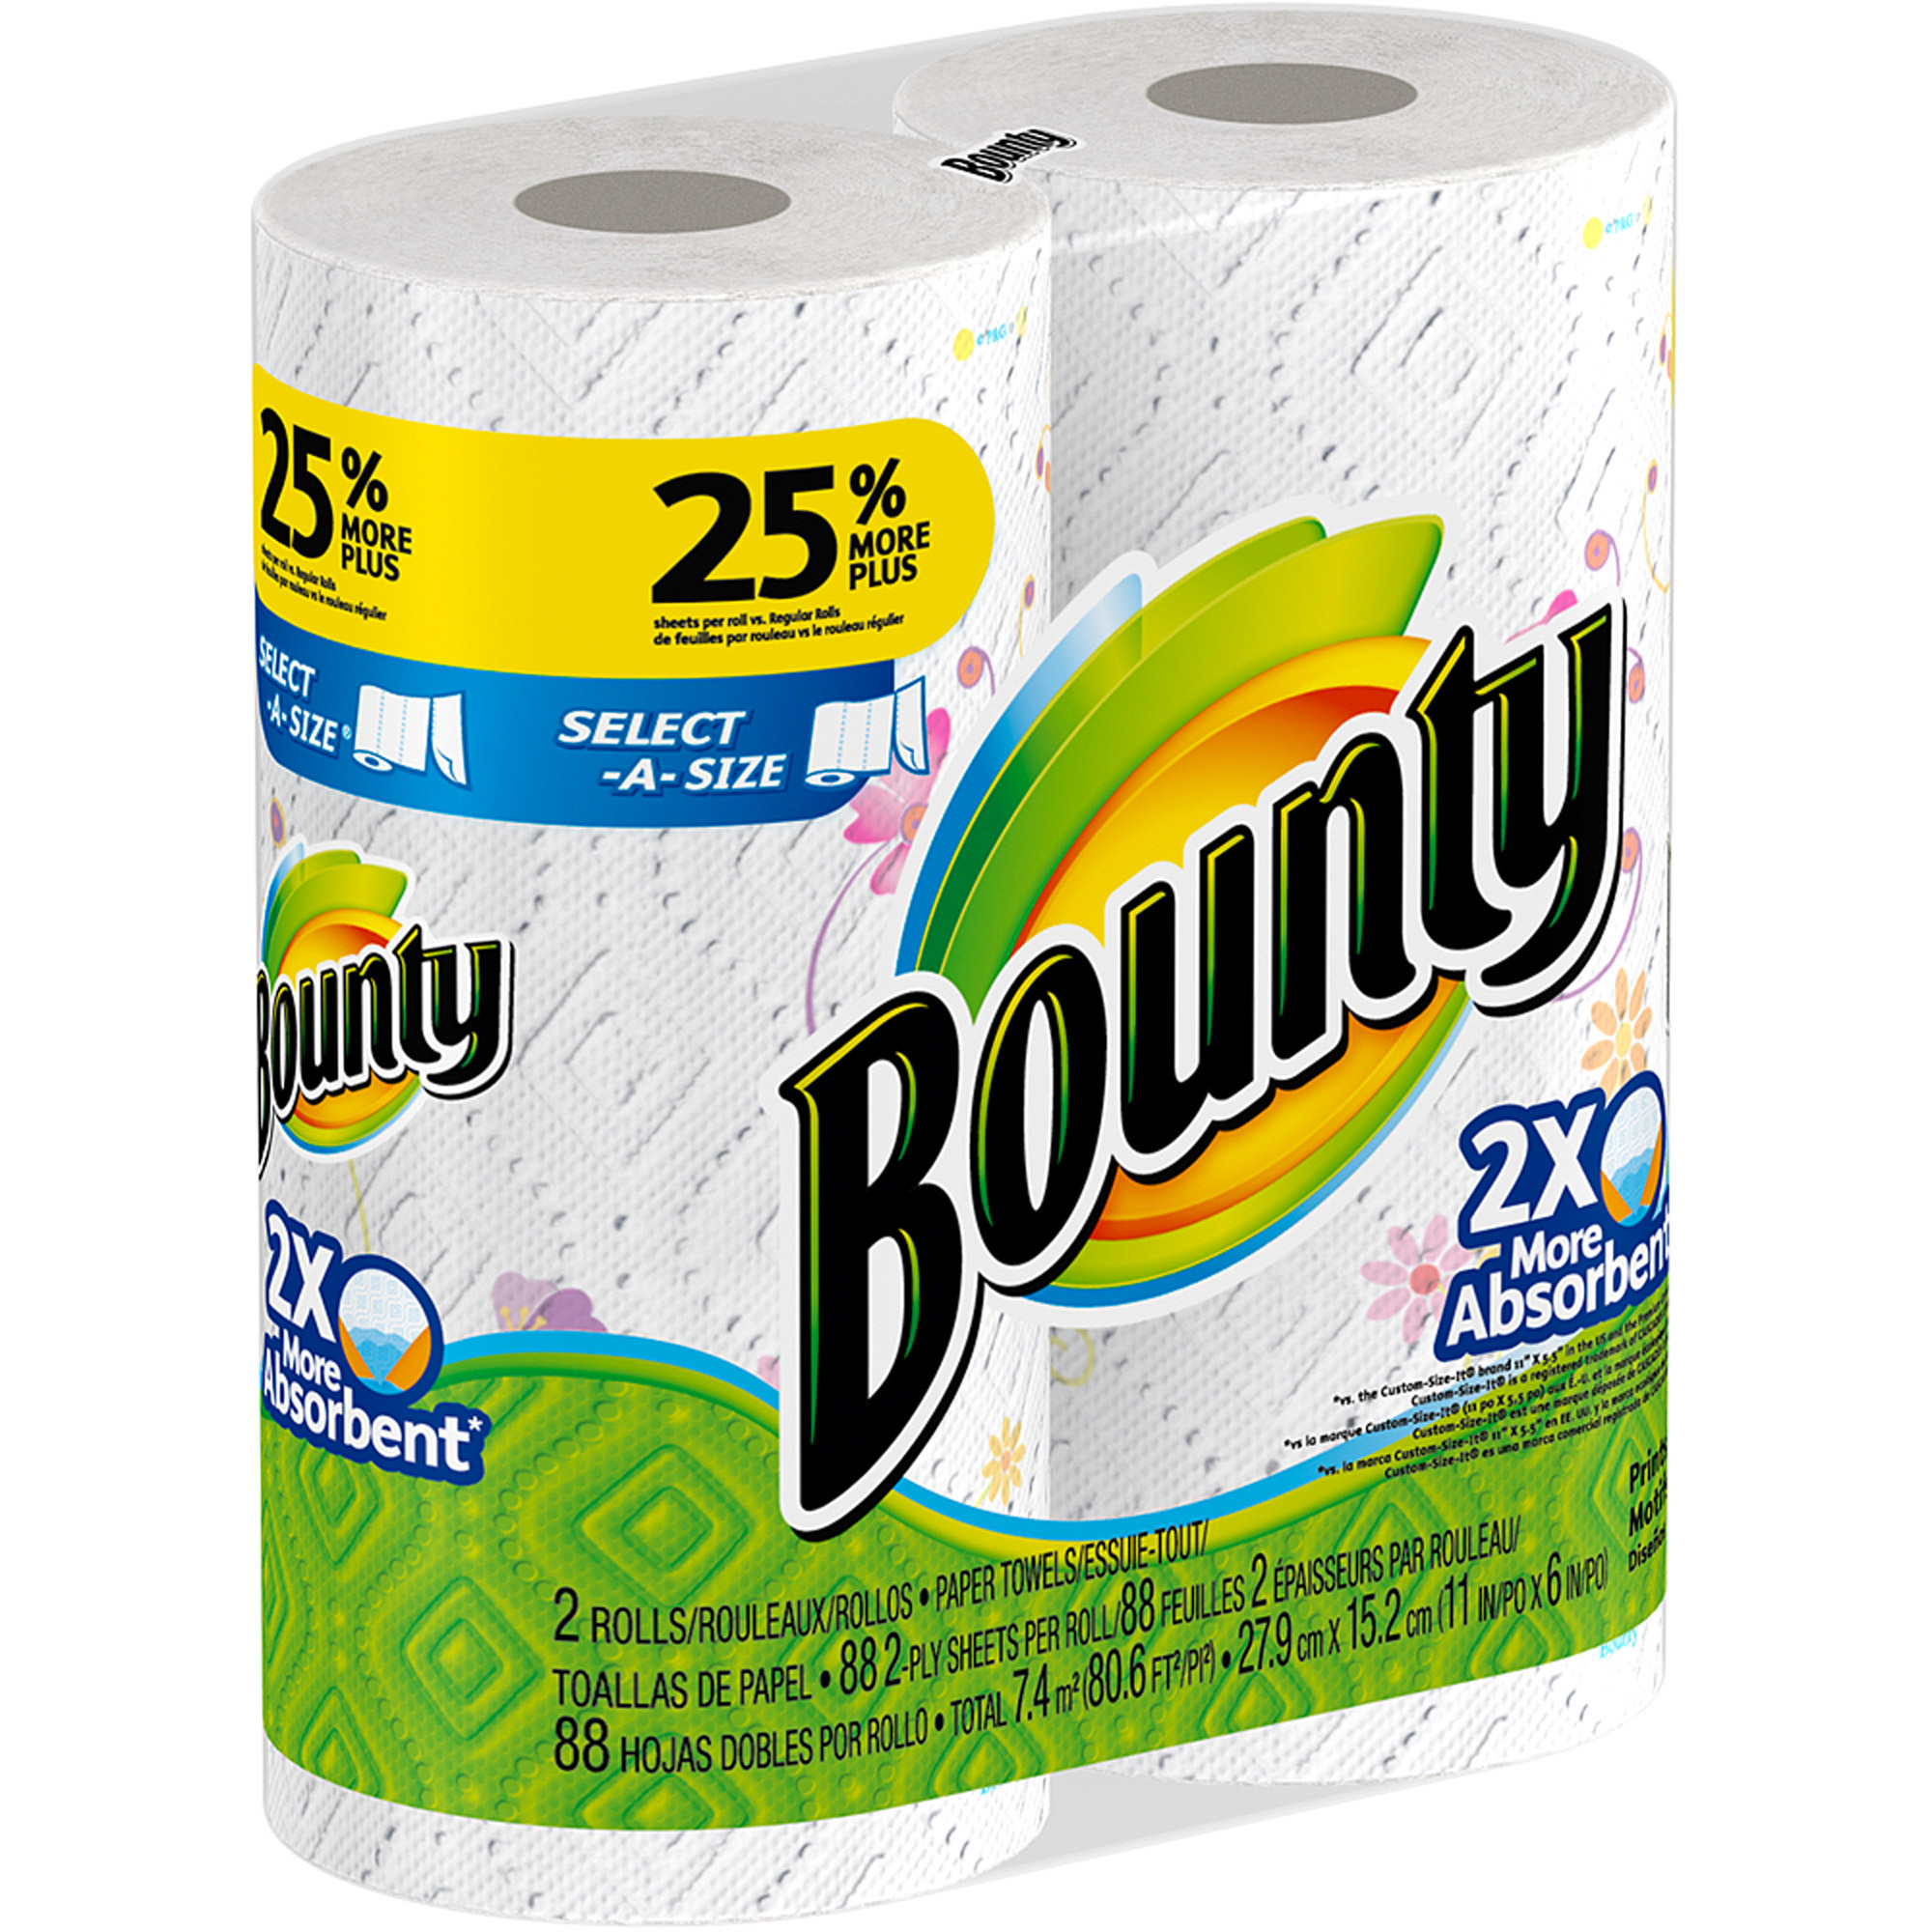 Bounty Select-A-Size Paper Towels, Print, 2 Rolls - image 7 of 7